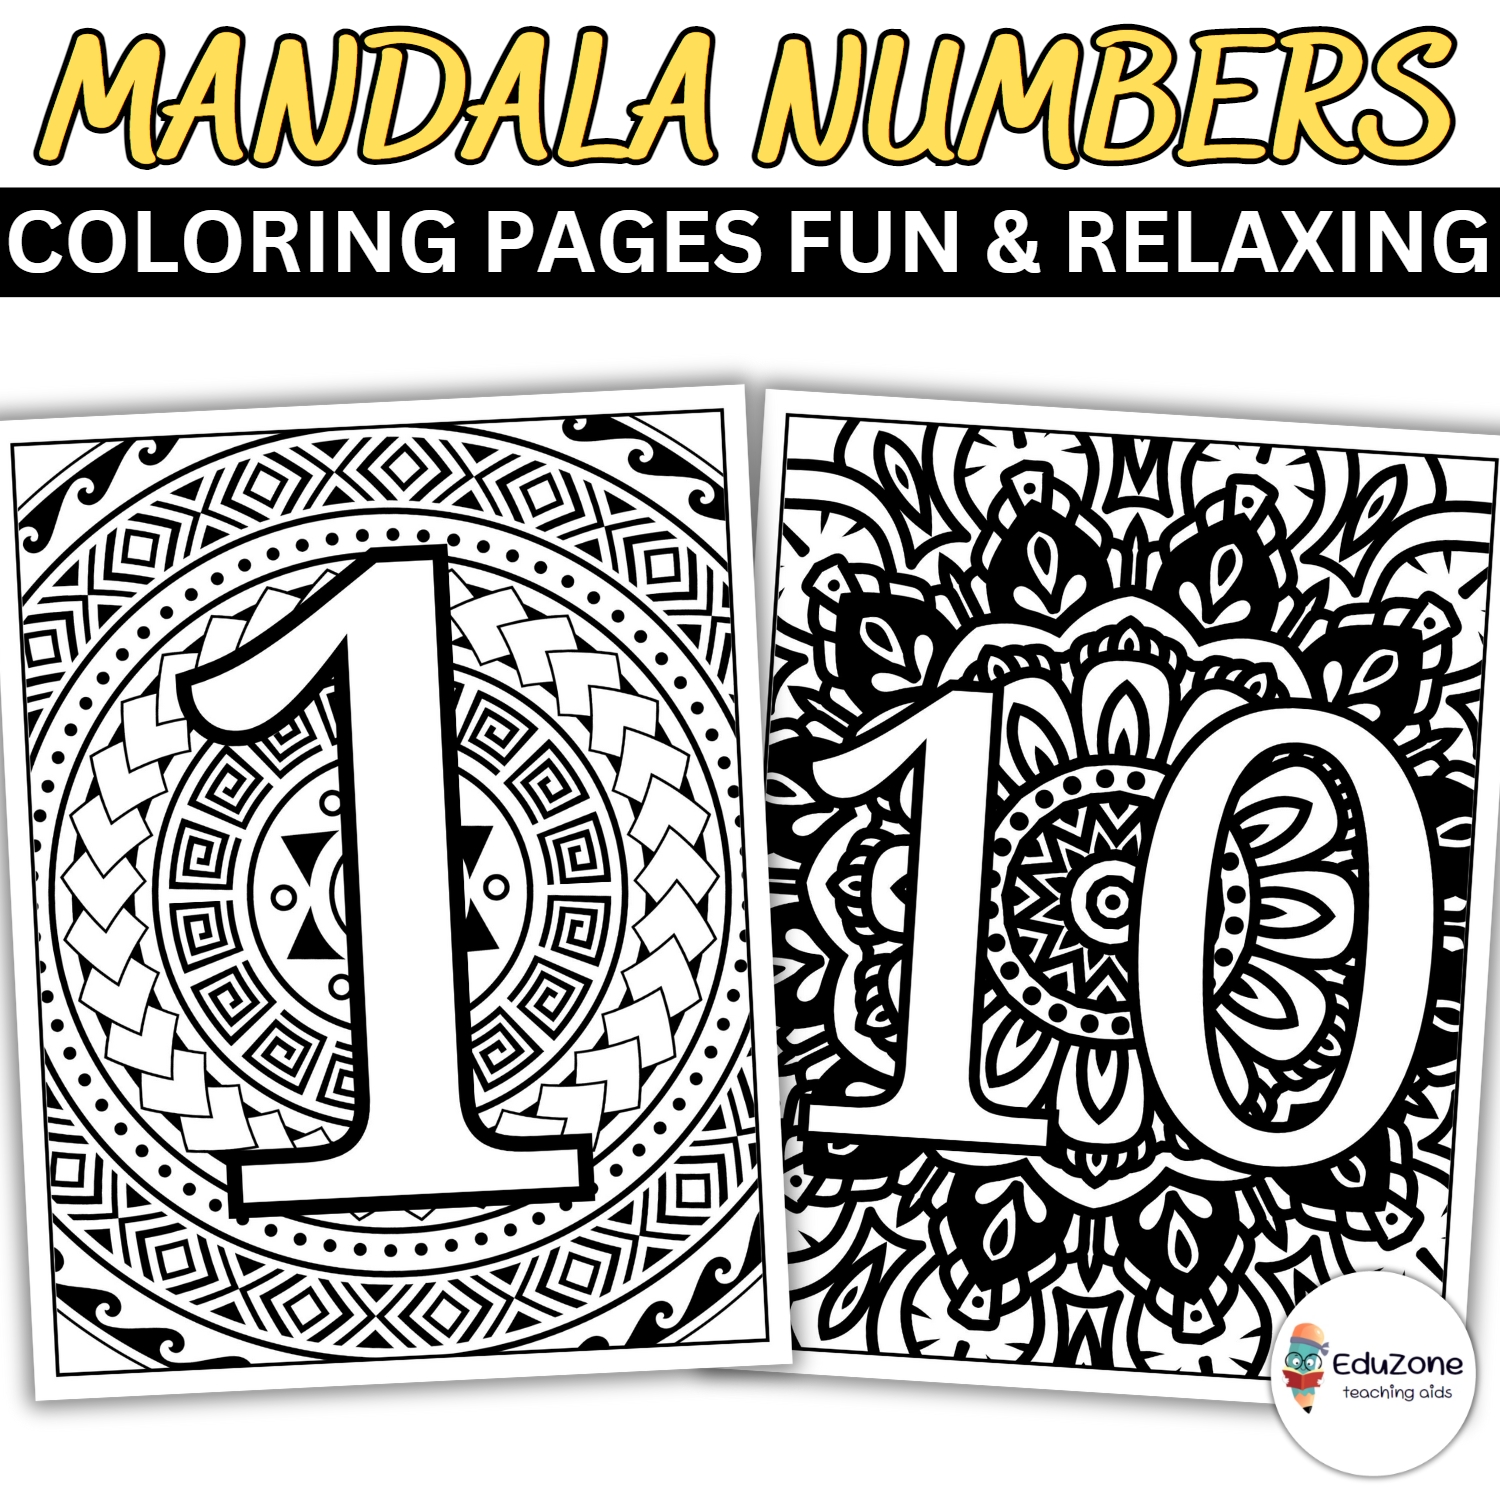 Learn numbers with mandala coloring pages relaxing printable